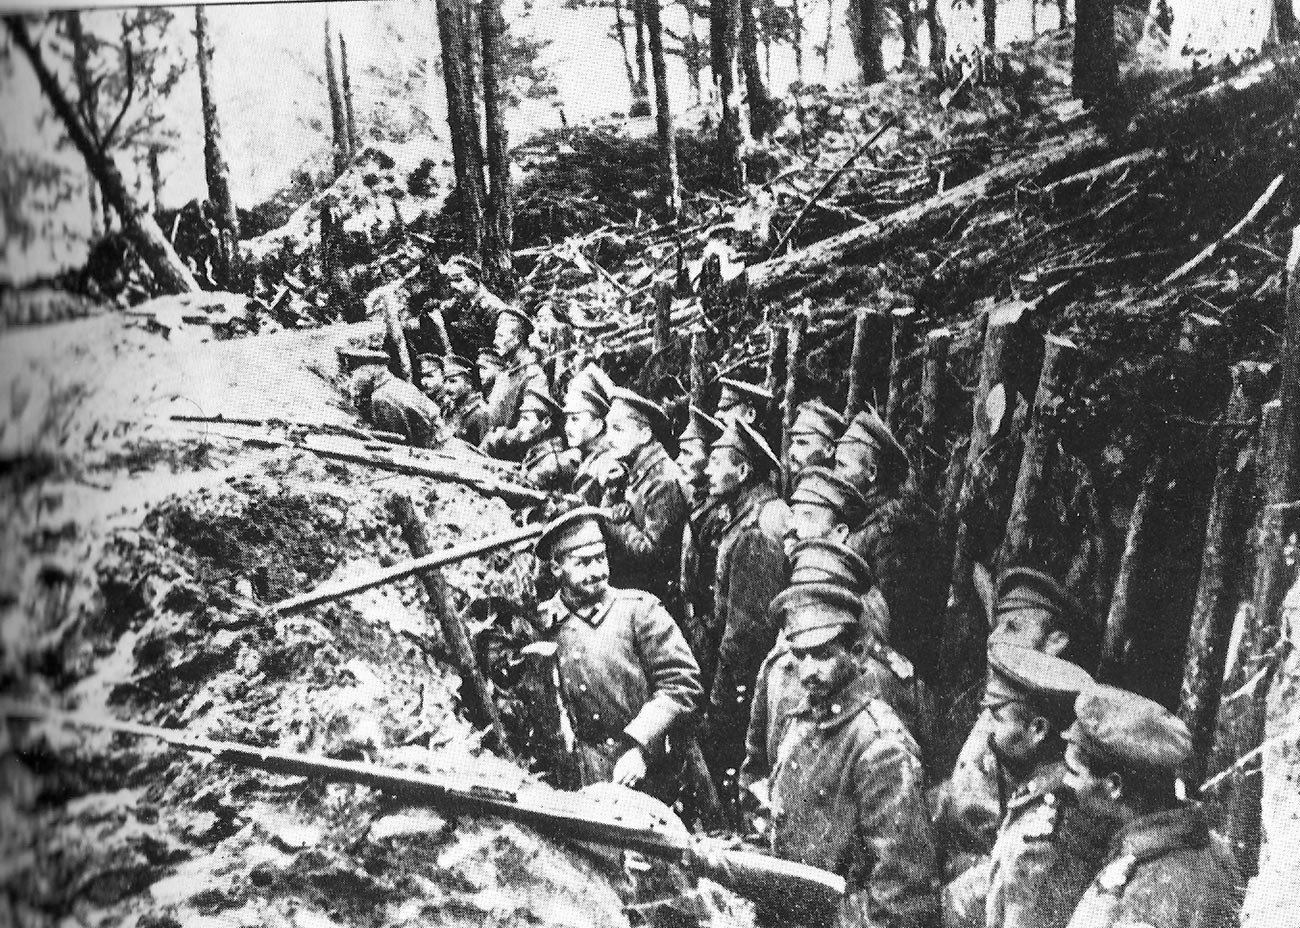 Russian trenches in the forests of Sarikamish.